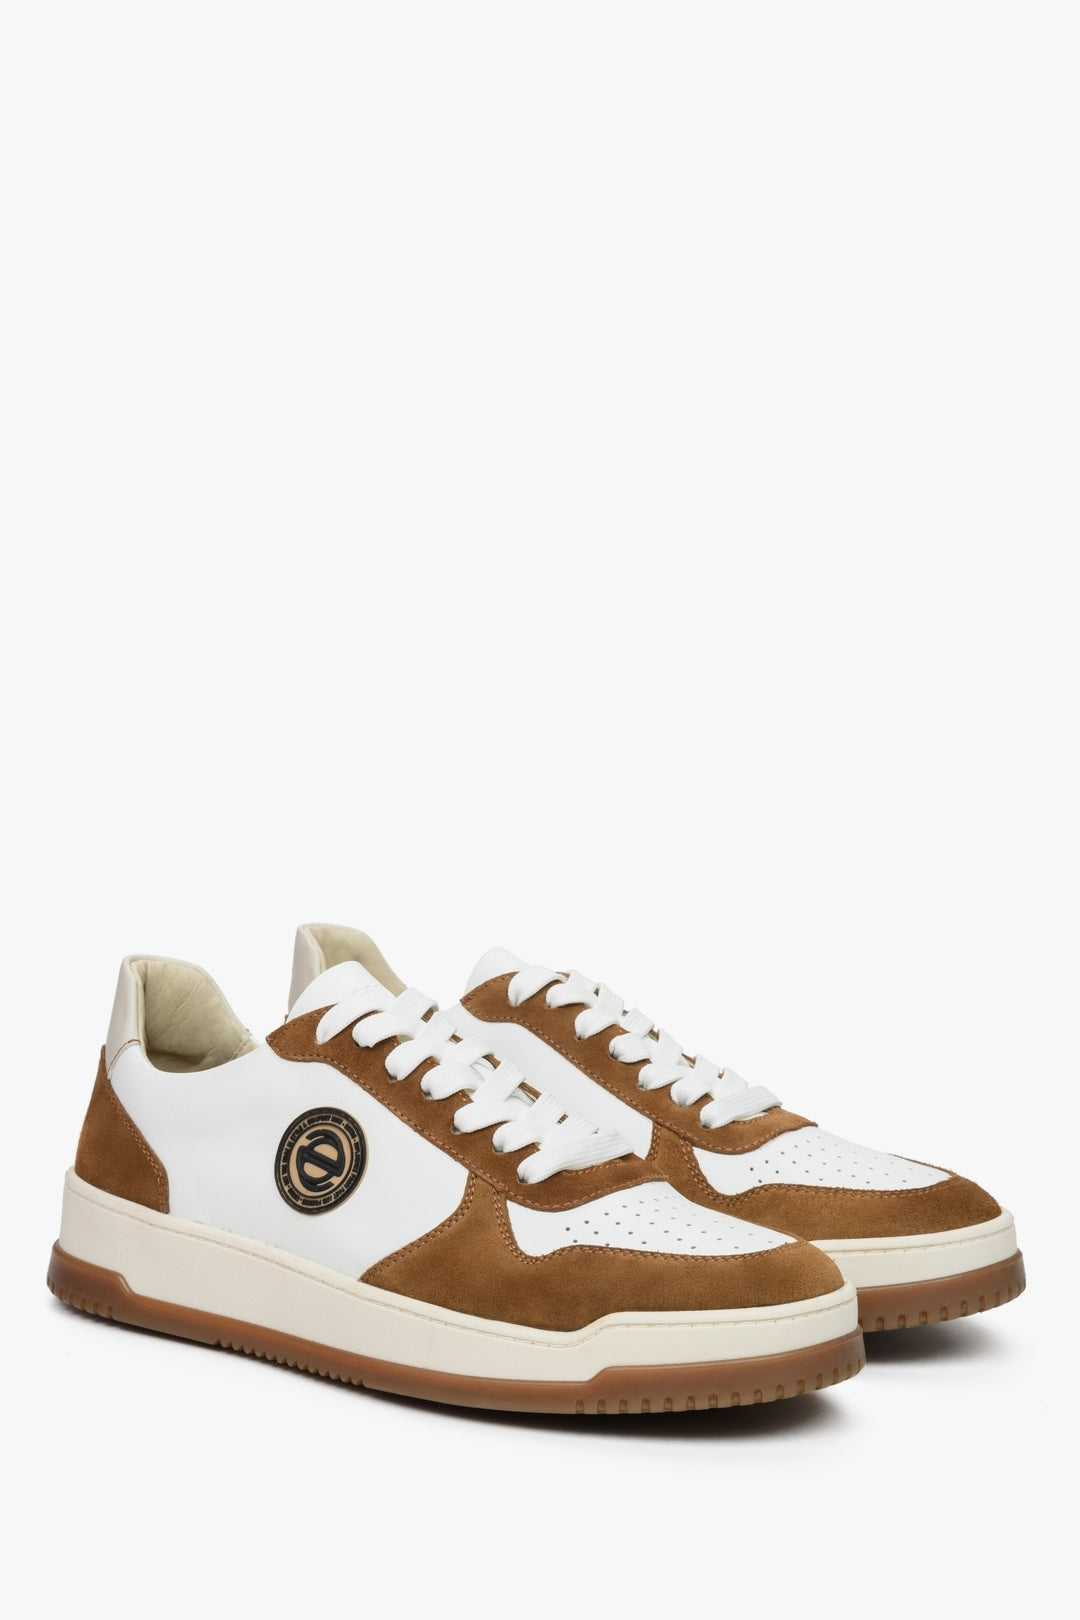 Men's suede and leather sneakers in brown and white by Estro.